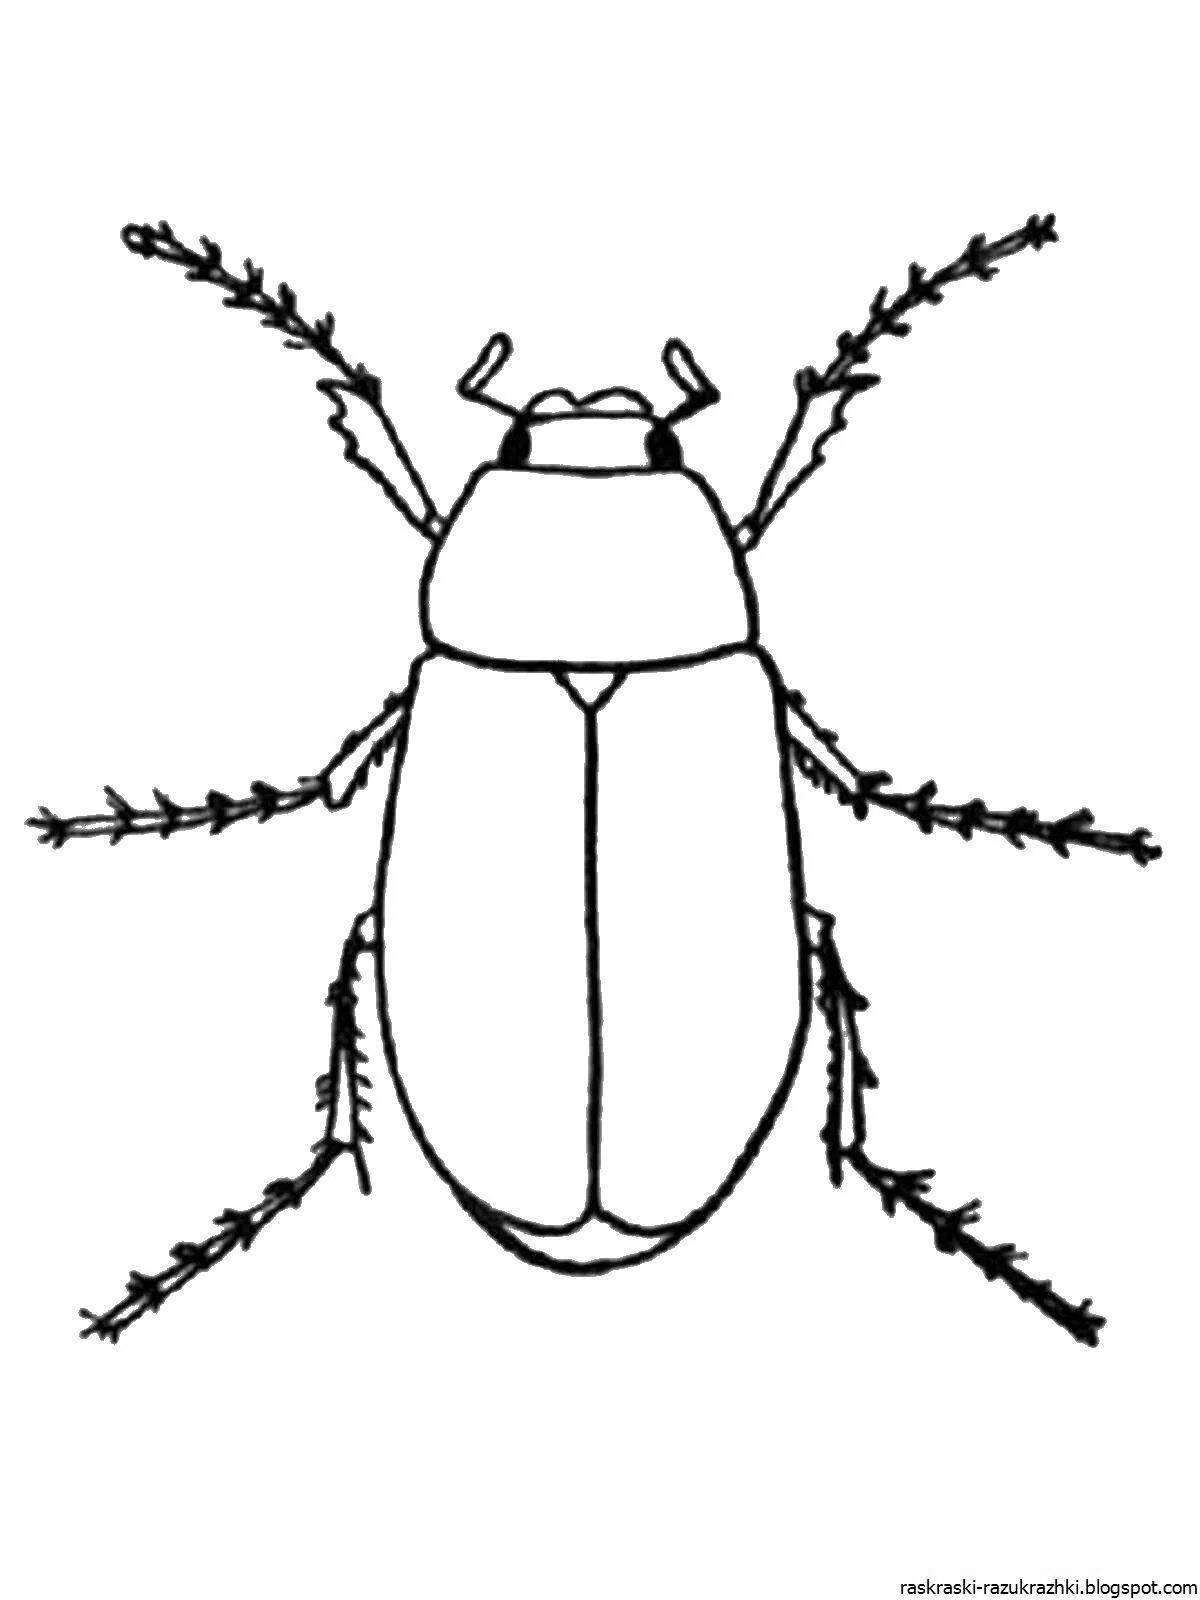 Glorious beetle coloring book